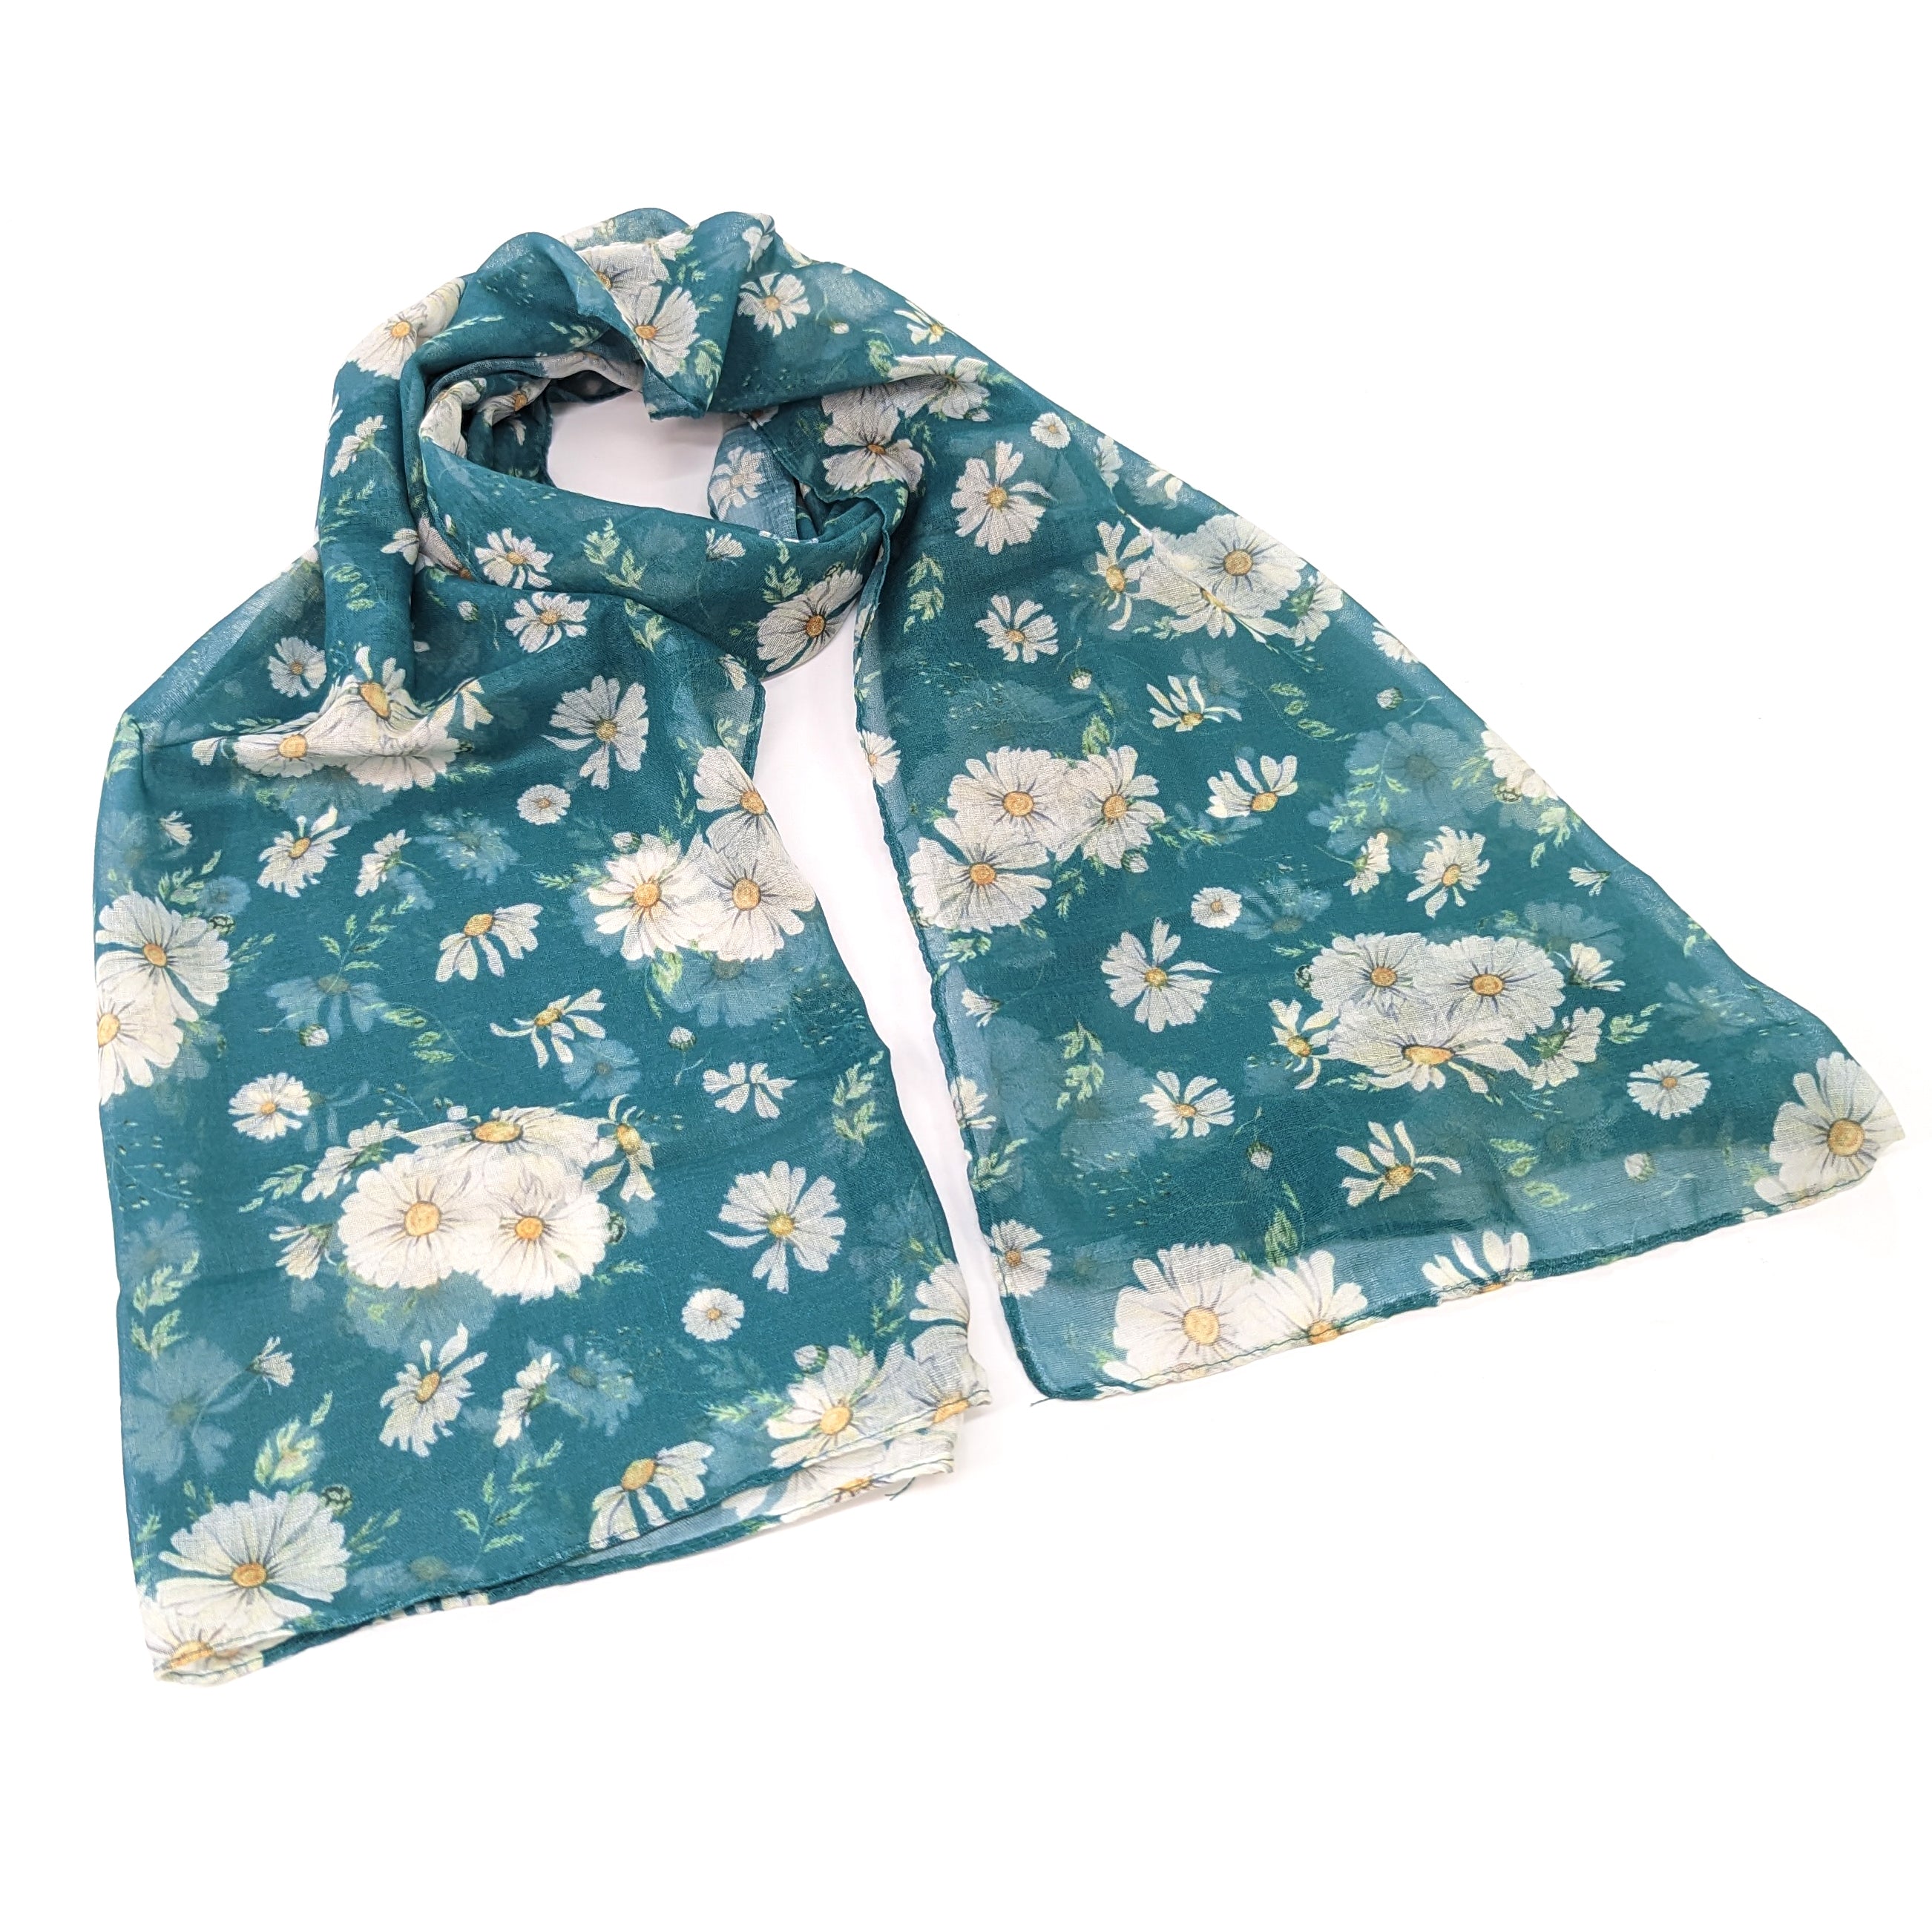 Dainty Daisies Scarf (50x180cm) - Teal - Exclusive Design